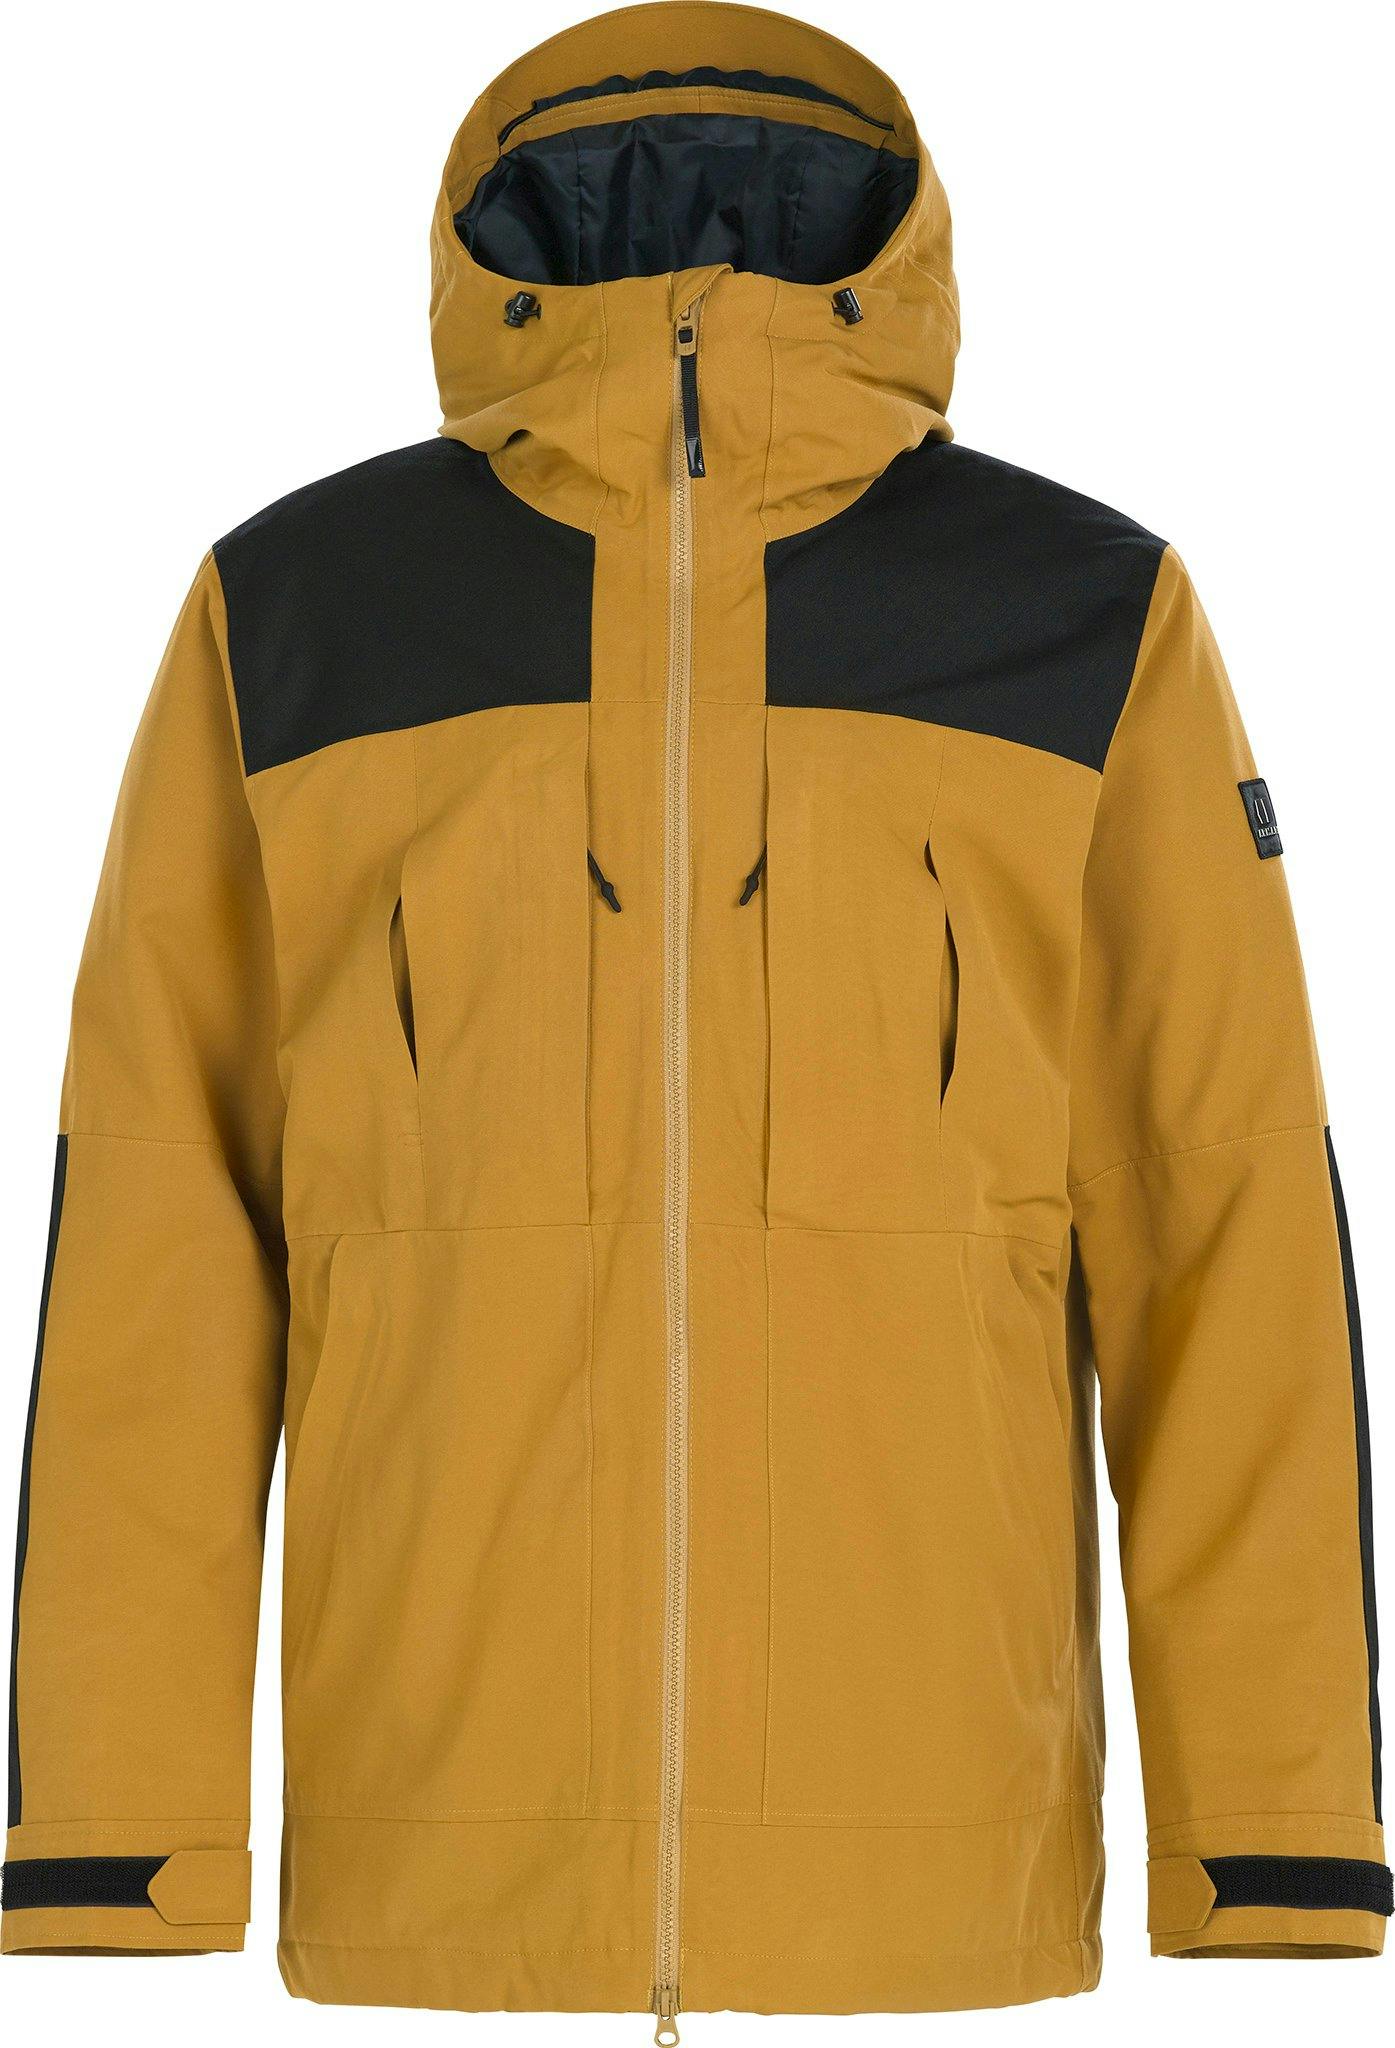 Product image for Bergs 2 Layer Insulated Jacket - Men's